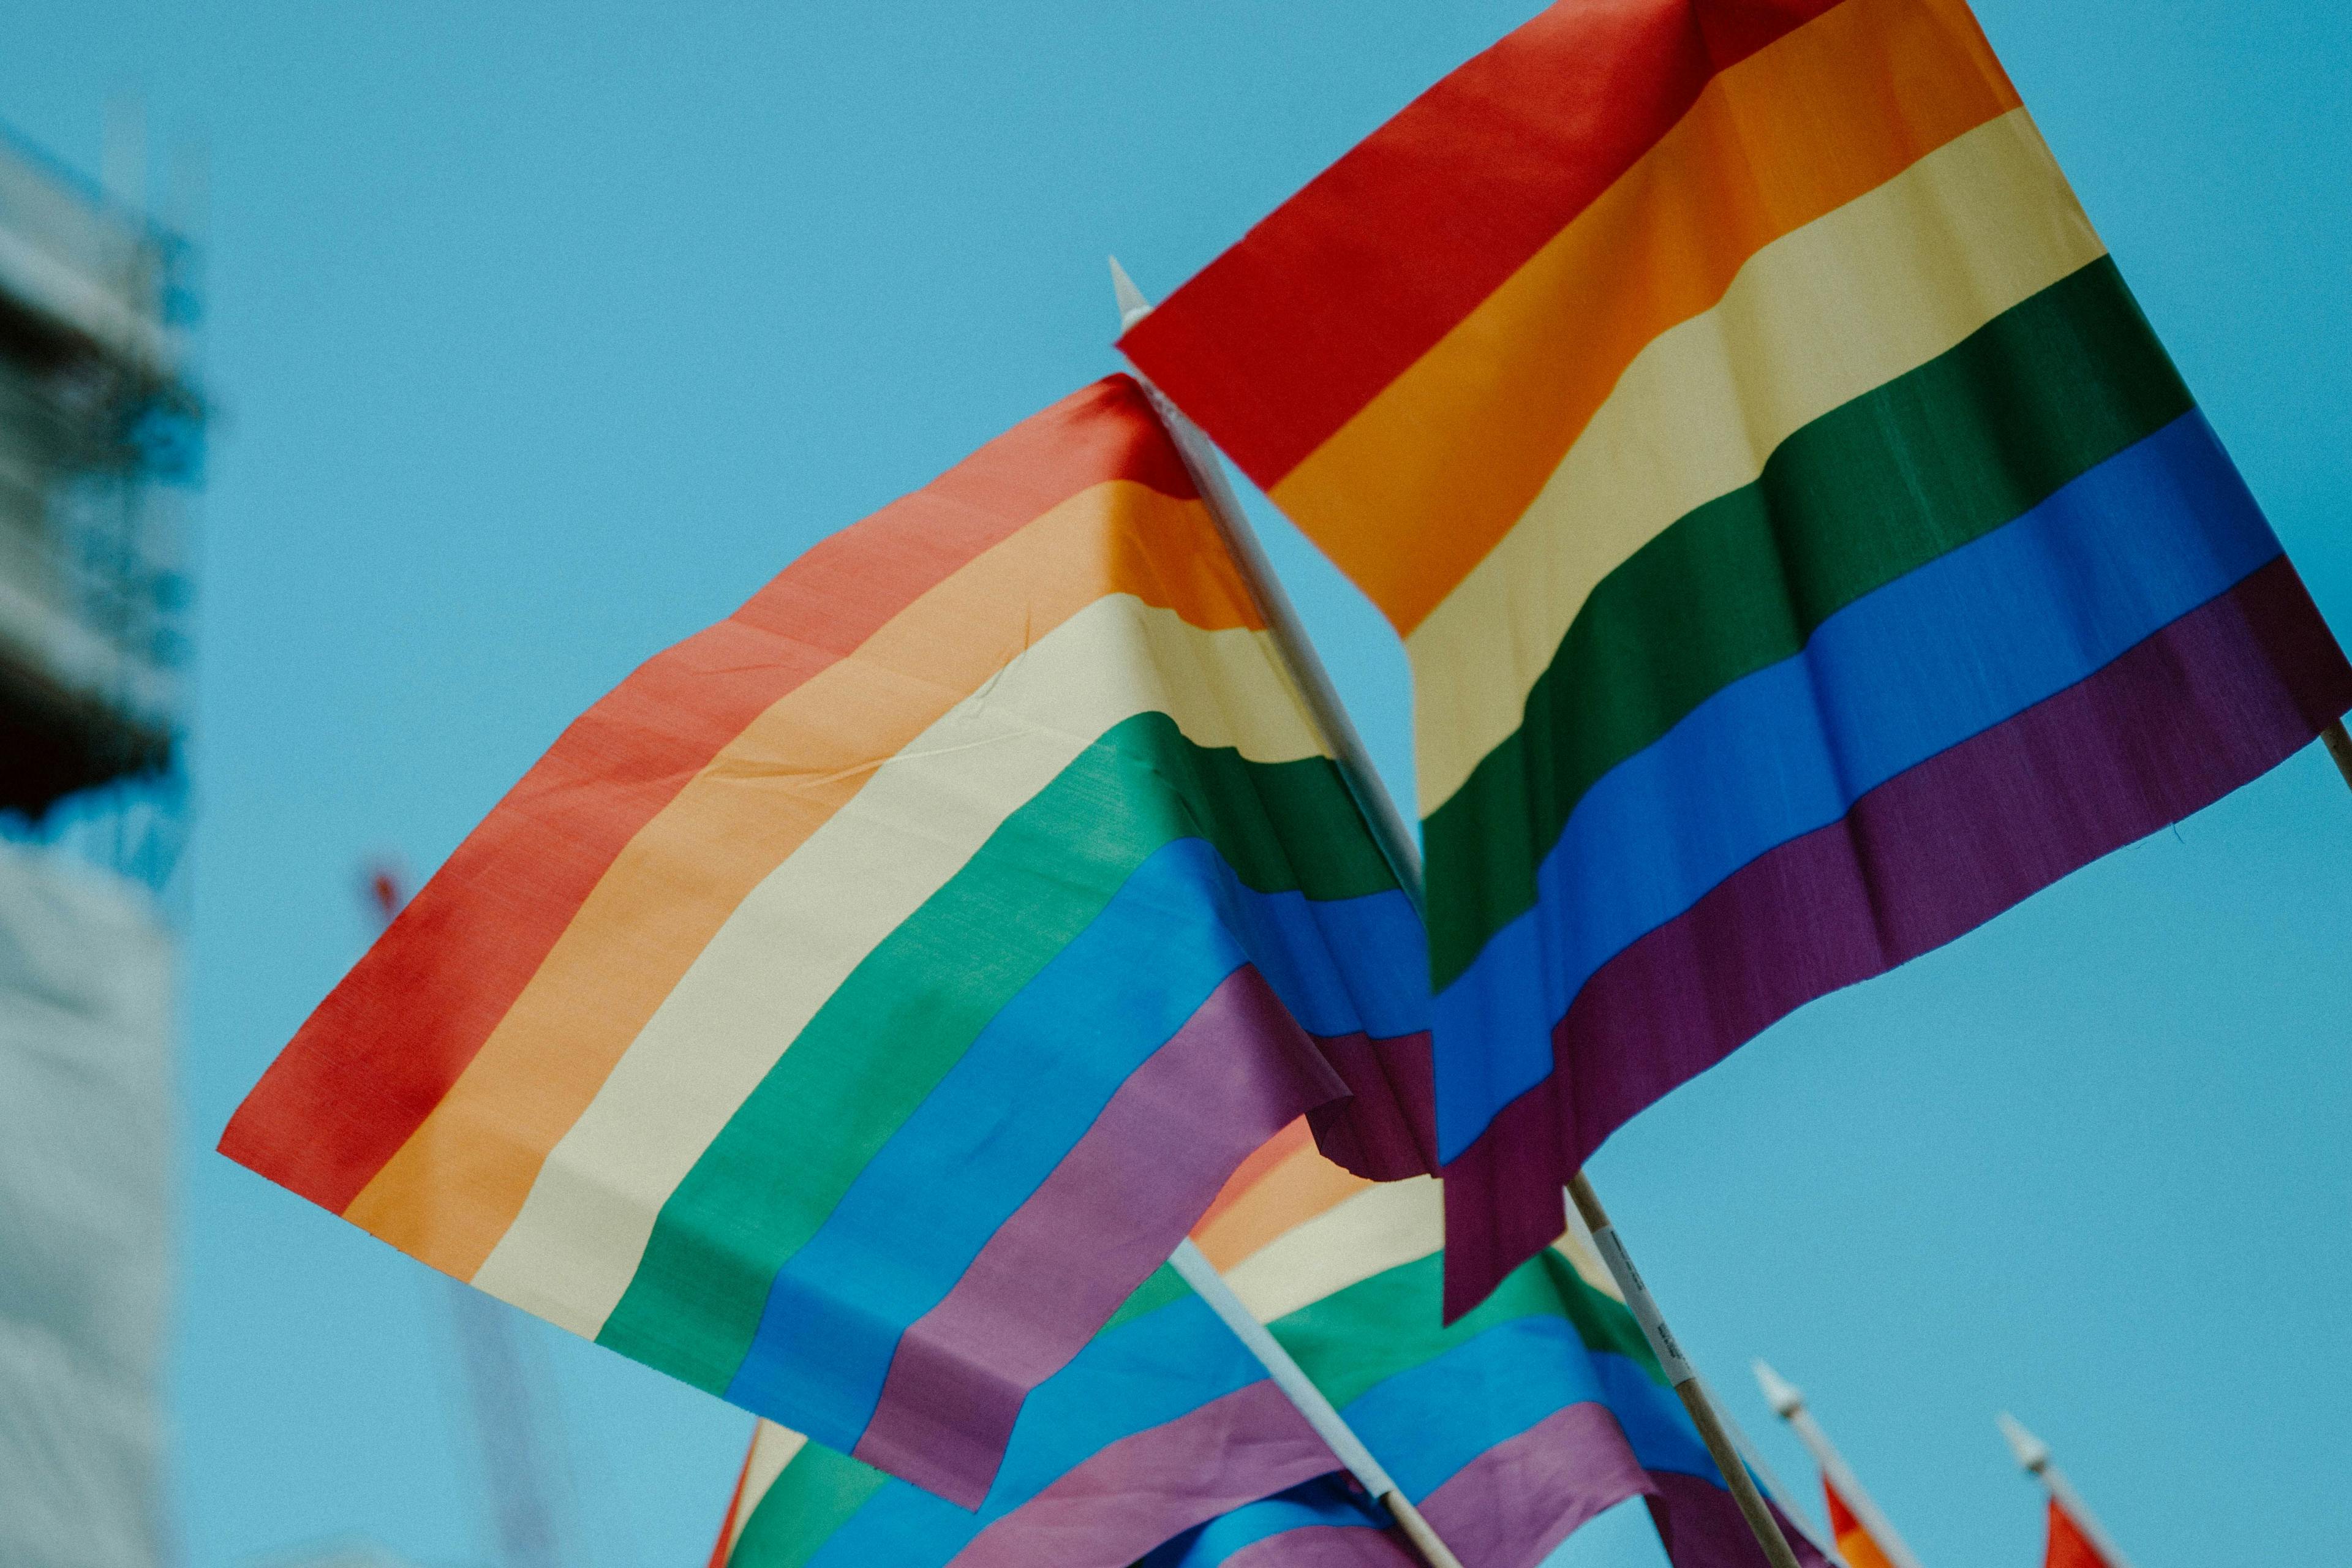 LGBTQ Cancer Survivors Report Lack of Social Support and Resources